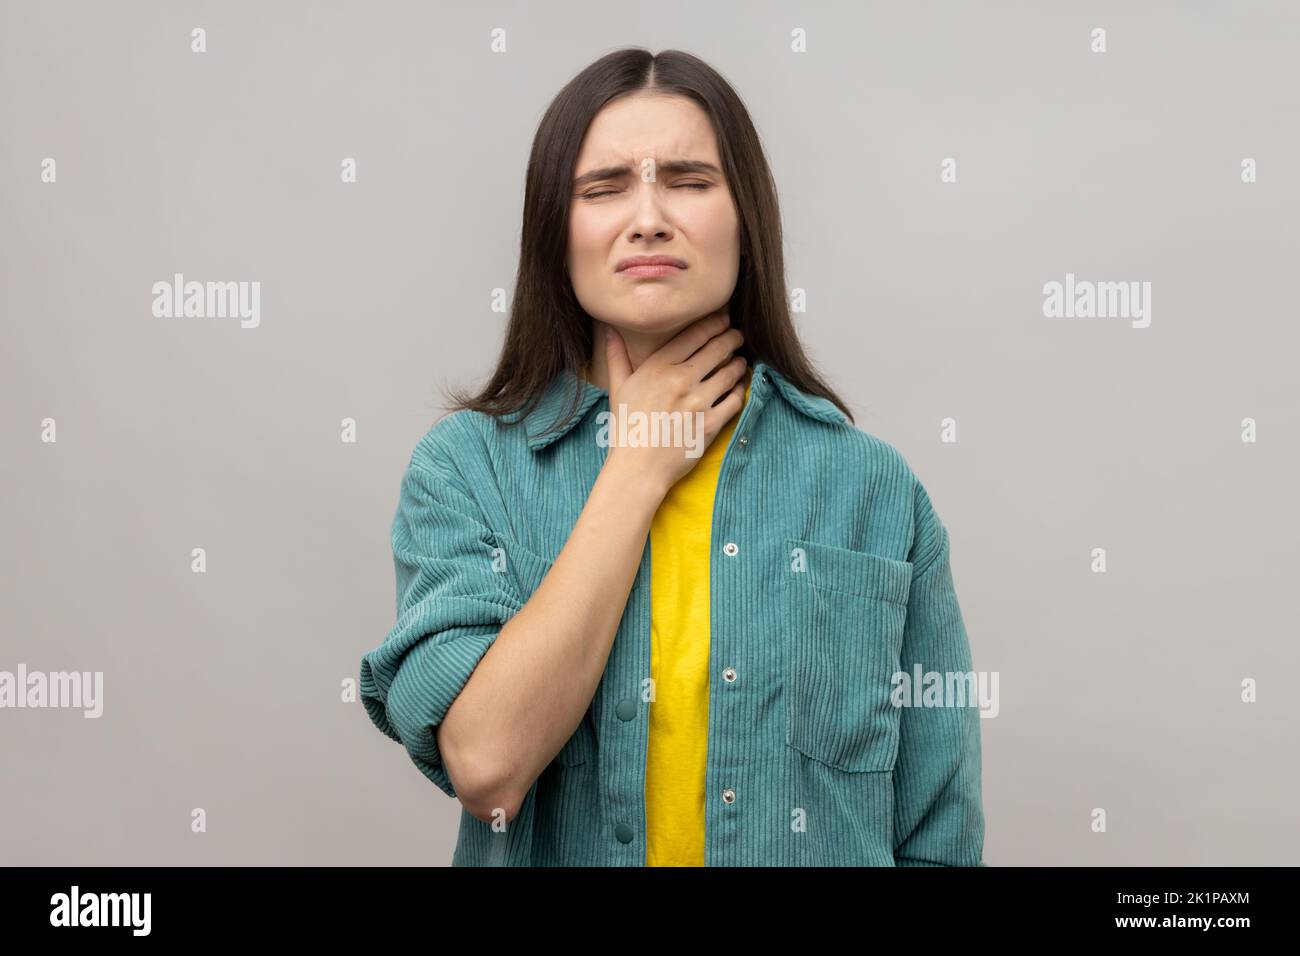 Portrait of sick dark haired woman touching sore neck feeling unwell, suffering tonsils inflammation, medical concept, wearing casual style jacket. Indoor studio shot isolated on gray background. Stock Photo